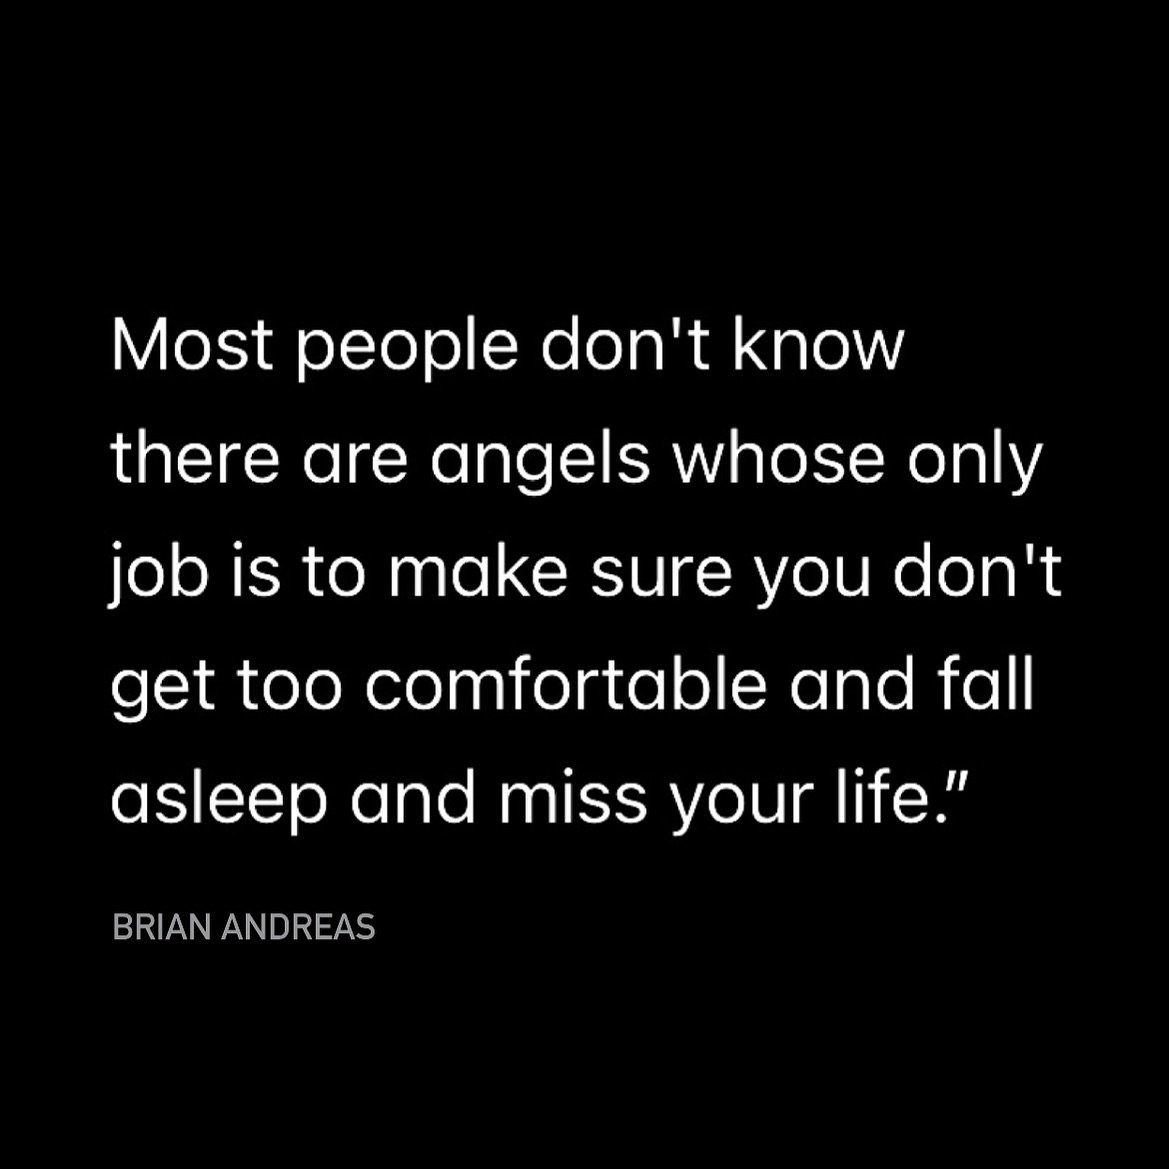 It&rsquo;s often the people we despise the most who make us better parents, siblings, friends, partners, and colleagues. 

In other words, anyone who teaches you how NOT to behave could very well be one of your angels.

Stranger things have happened.